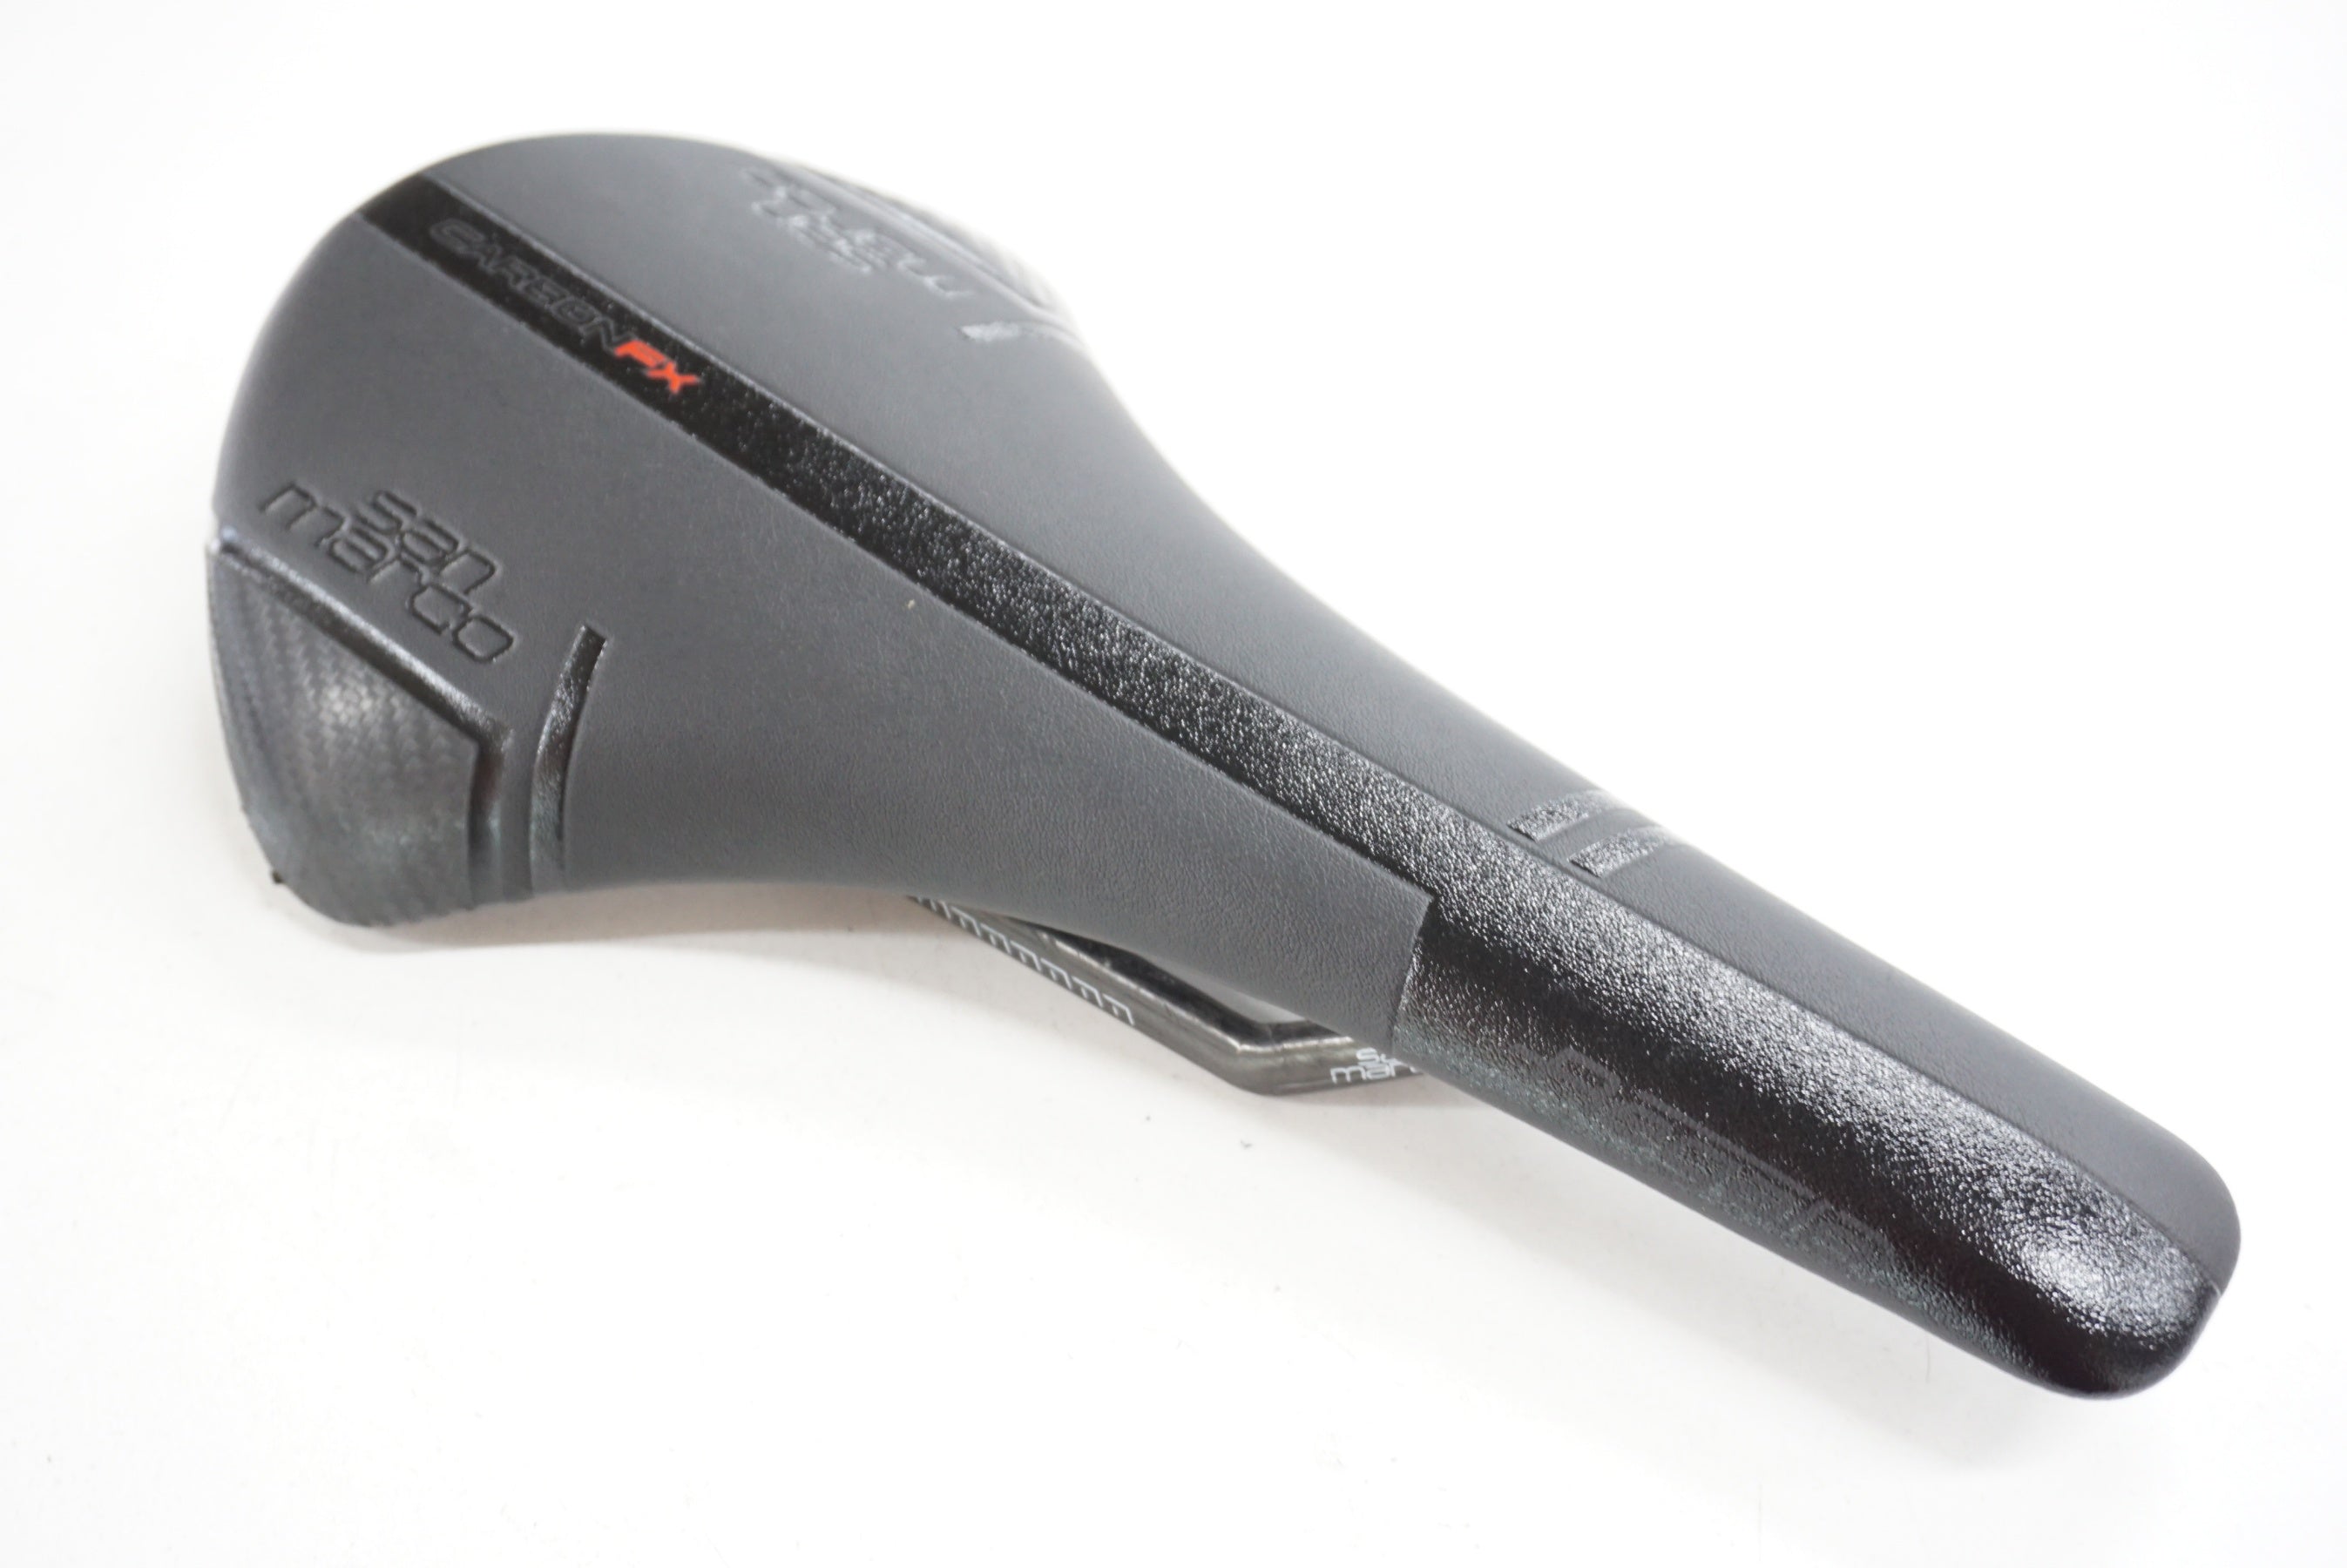 selle san marco Mantra wide サドル カーボンレール 最新号掲載 